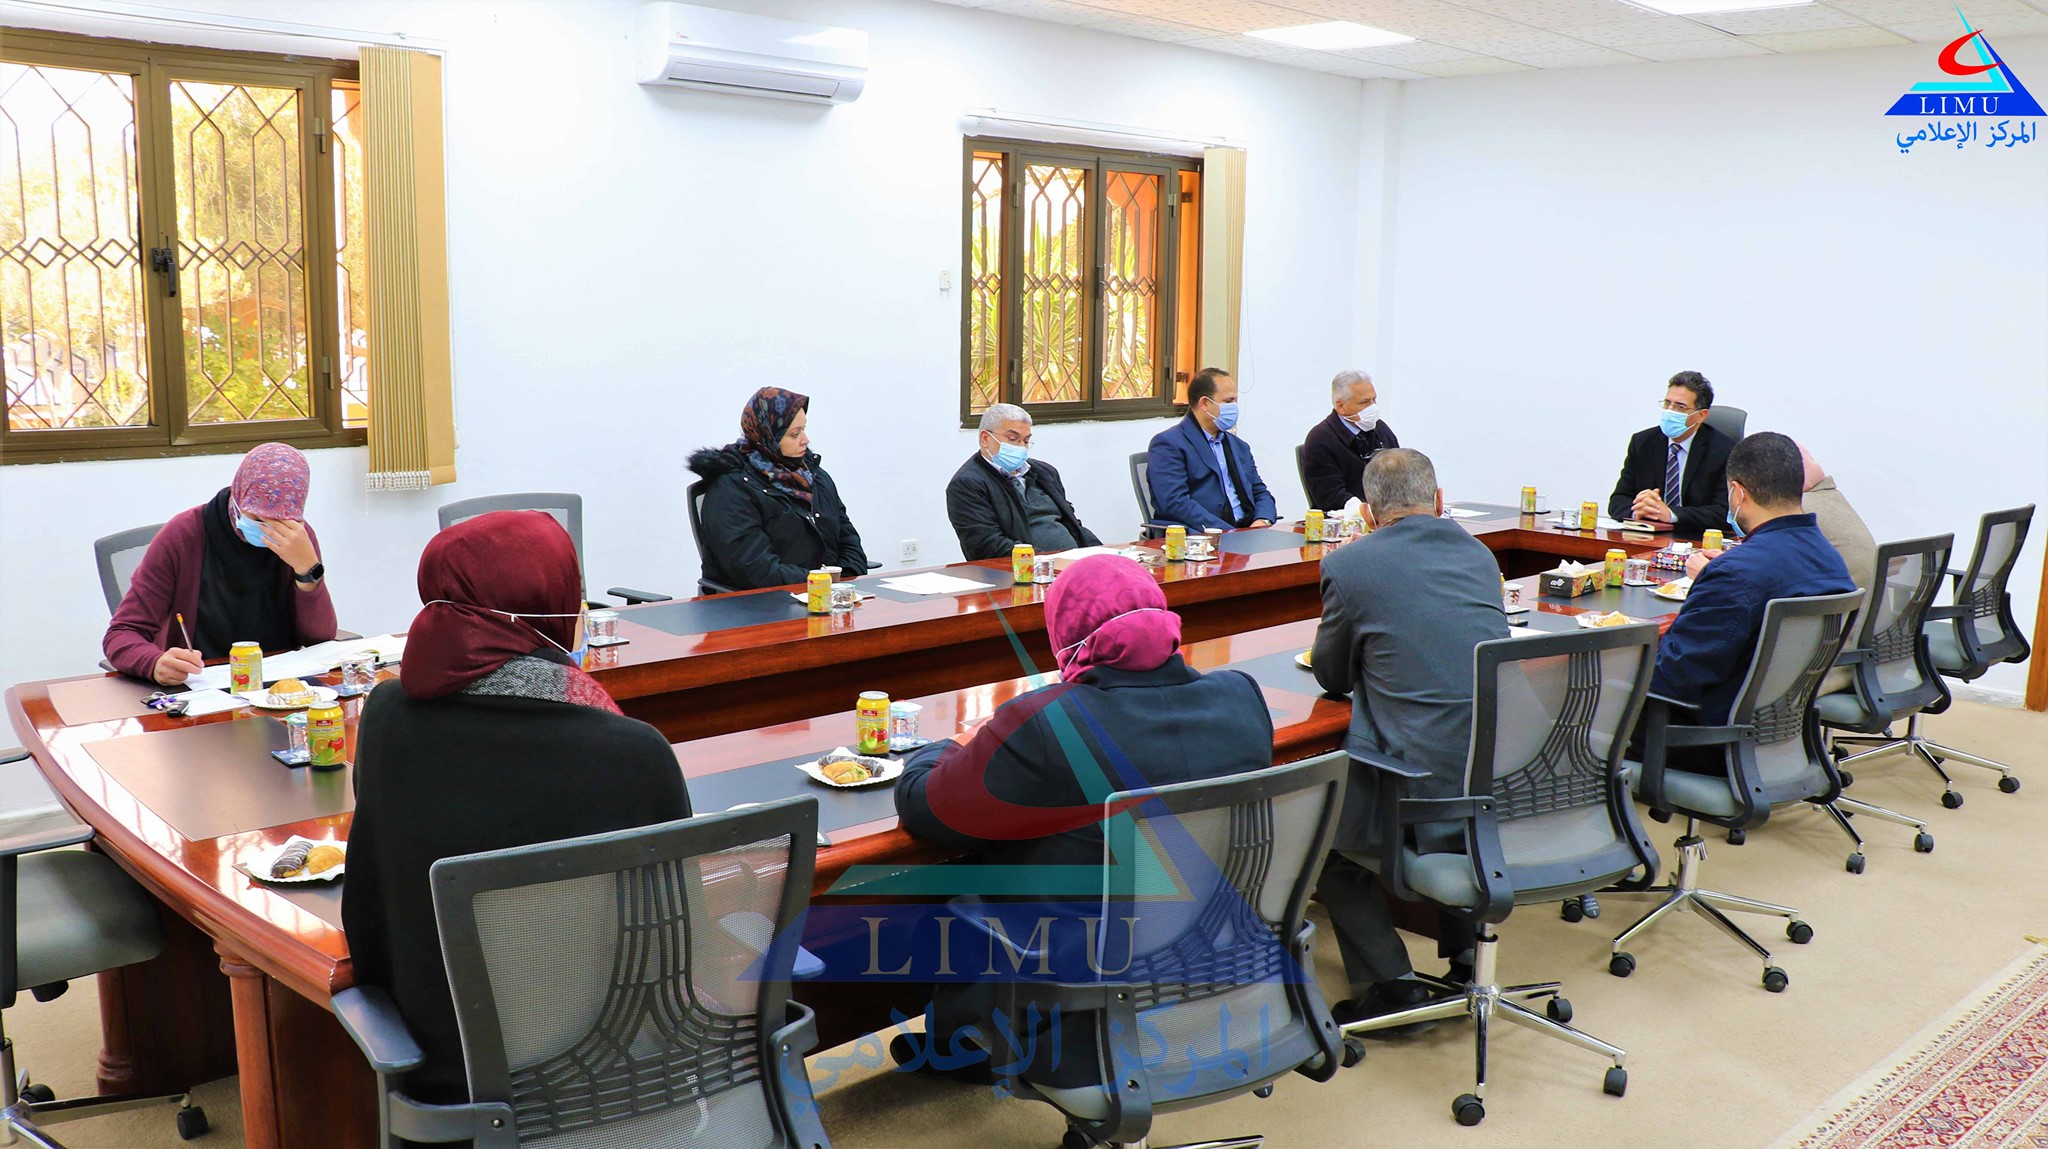 The Council of the Faculty of Medicine holds its regular meeting